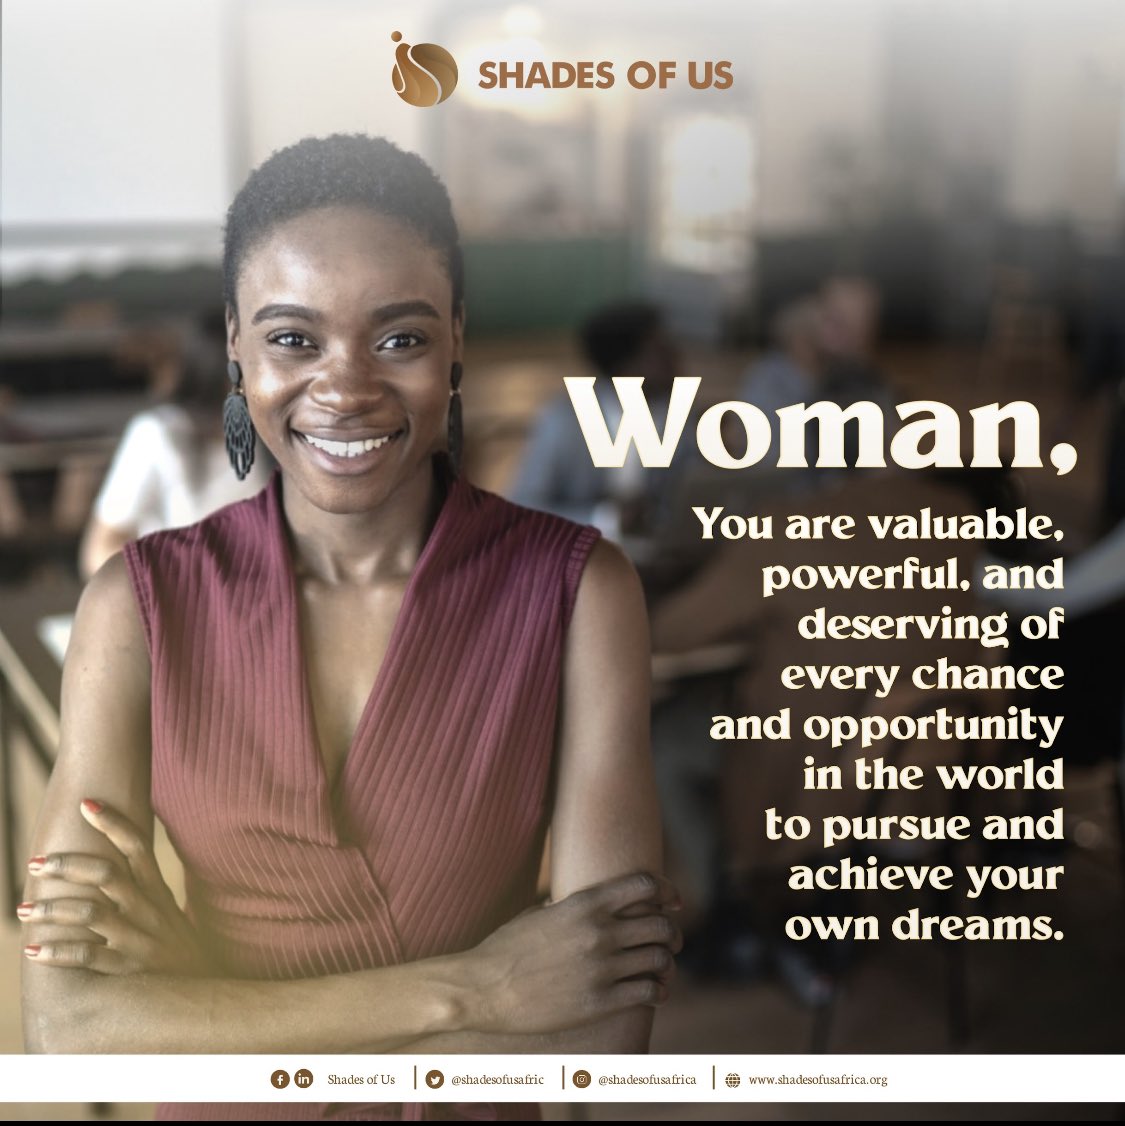 Every woman possesses immense value and power, deserving equal opportunities to pursue her dreams. Gender equality champions these principles, advocating for equal opportunities for all. Together, let us empower one another to succeed without limitations. #ShadesofUs #Equality